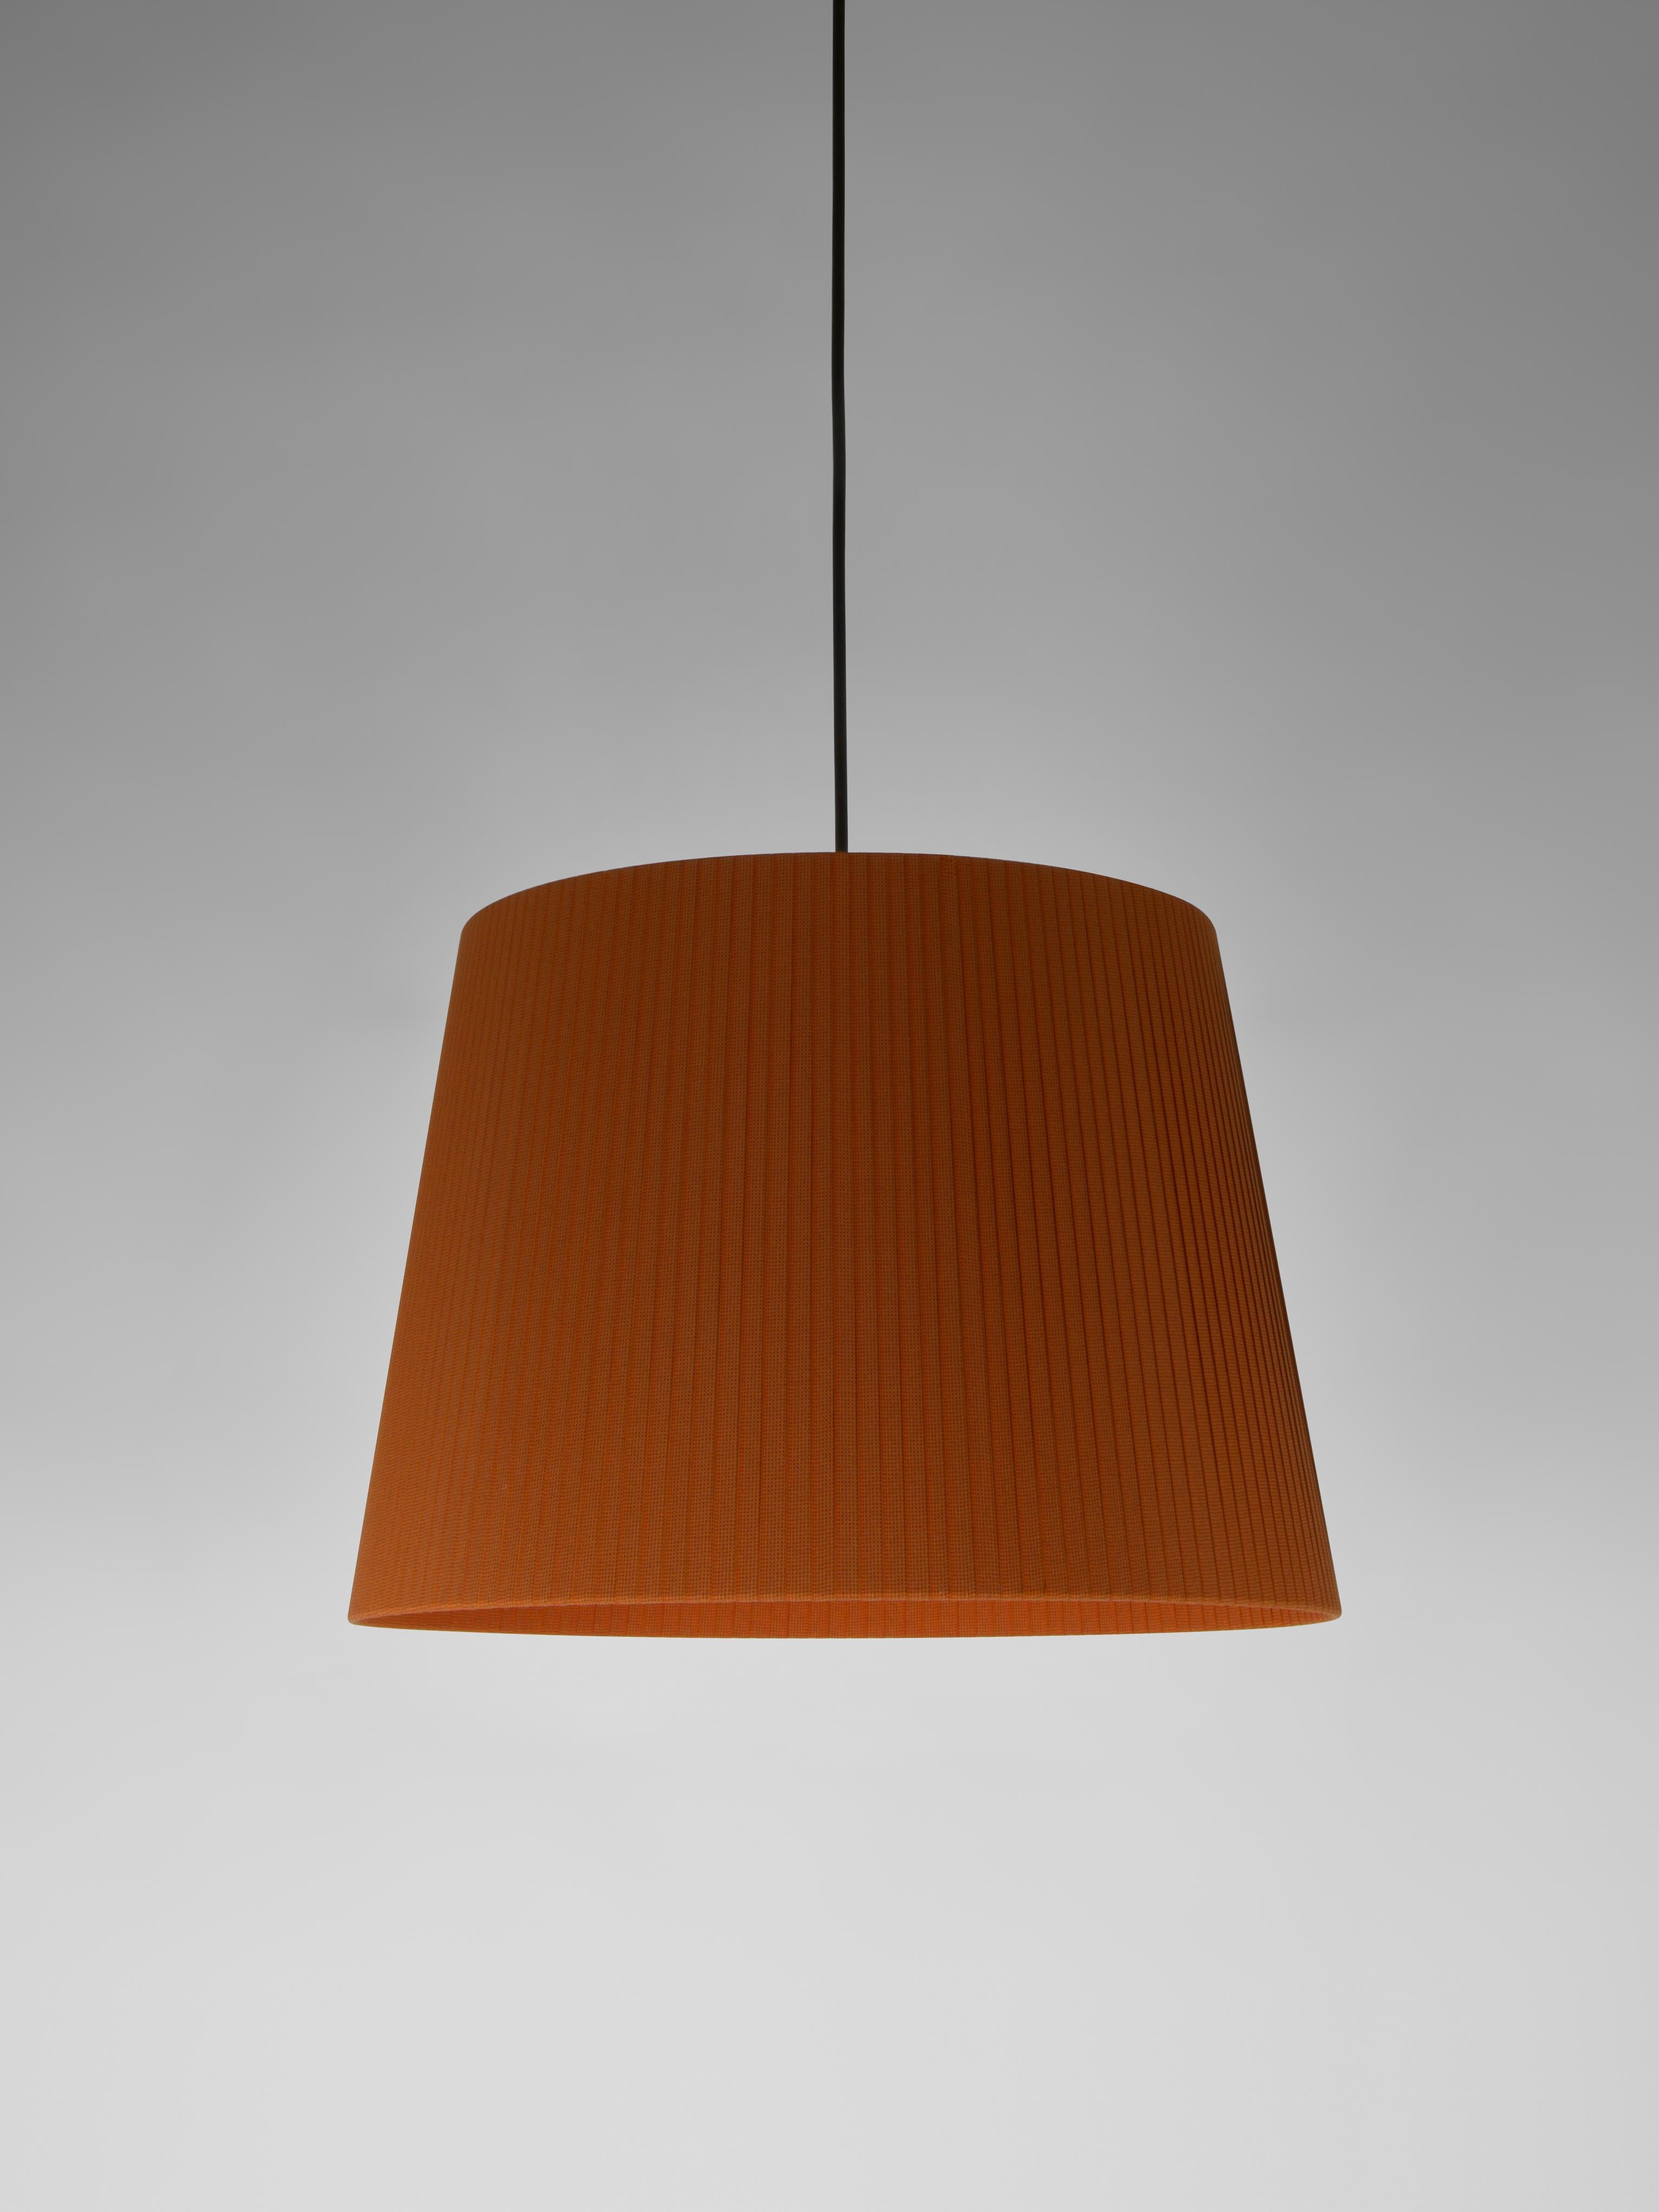 Terracotta Sísísí Cónicas GT1 pendant lamp by Santa & Cole
Dimensions: D 45 x H 32 cm
Materials: Metal, ribbon.
Available in other colors.
Also available in two lights version.

The conical shape group has multiple finishes and sizes. It